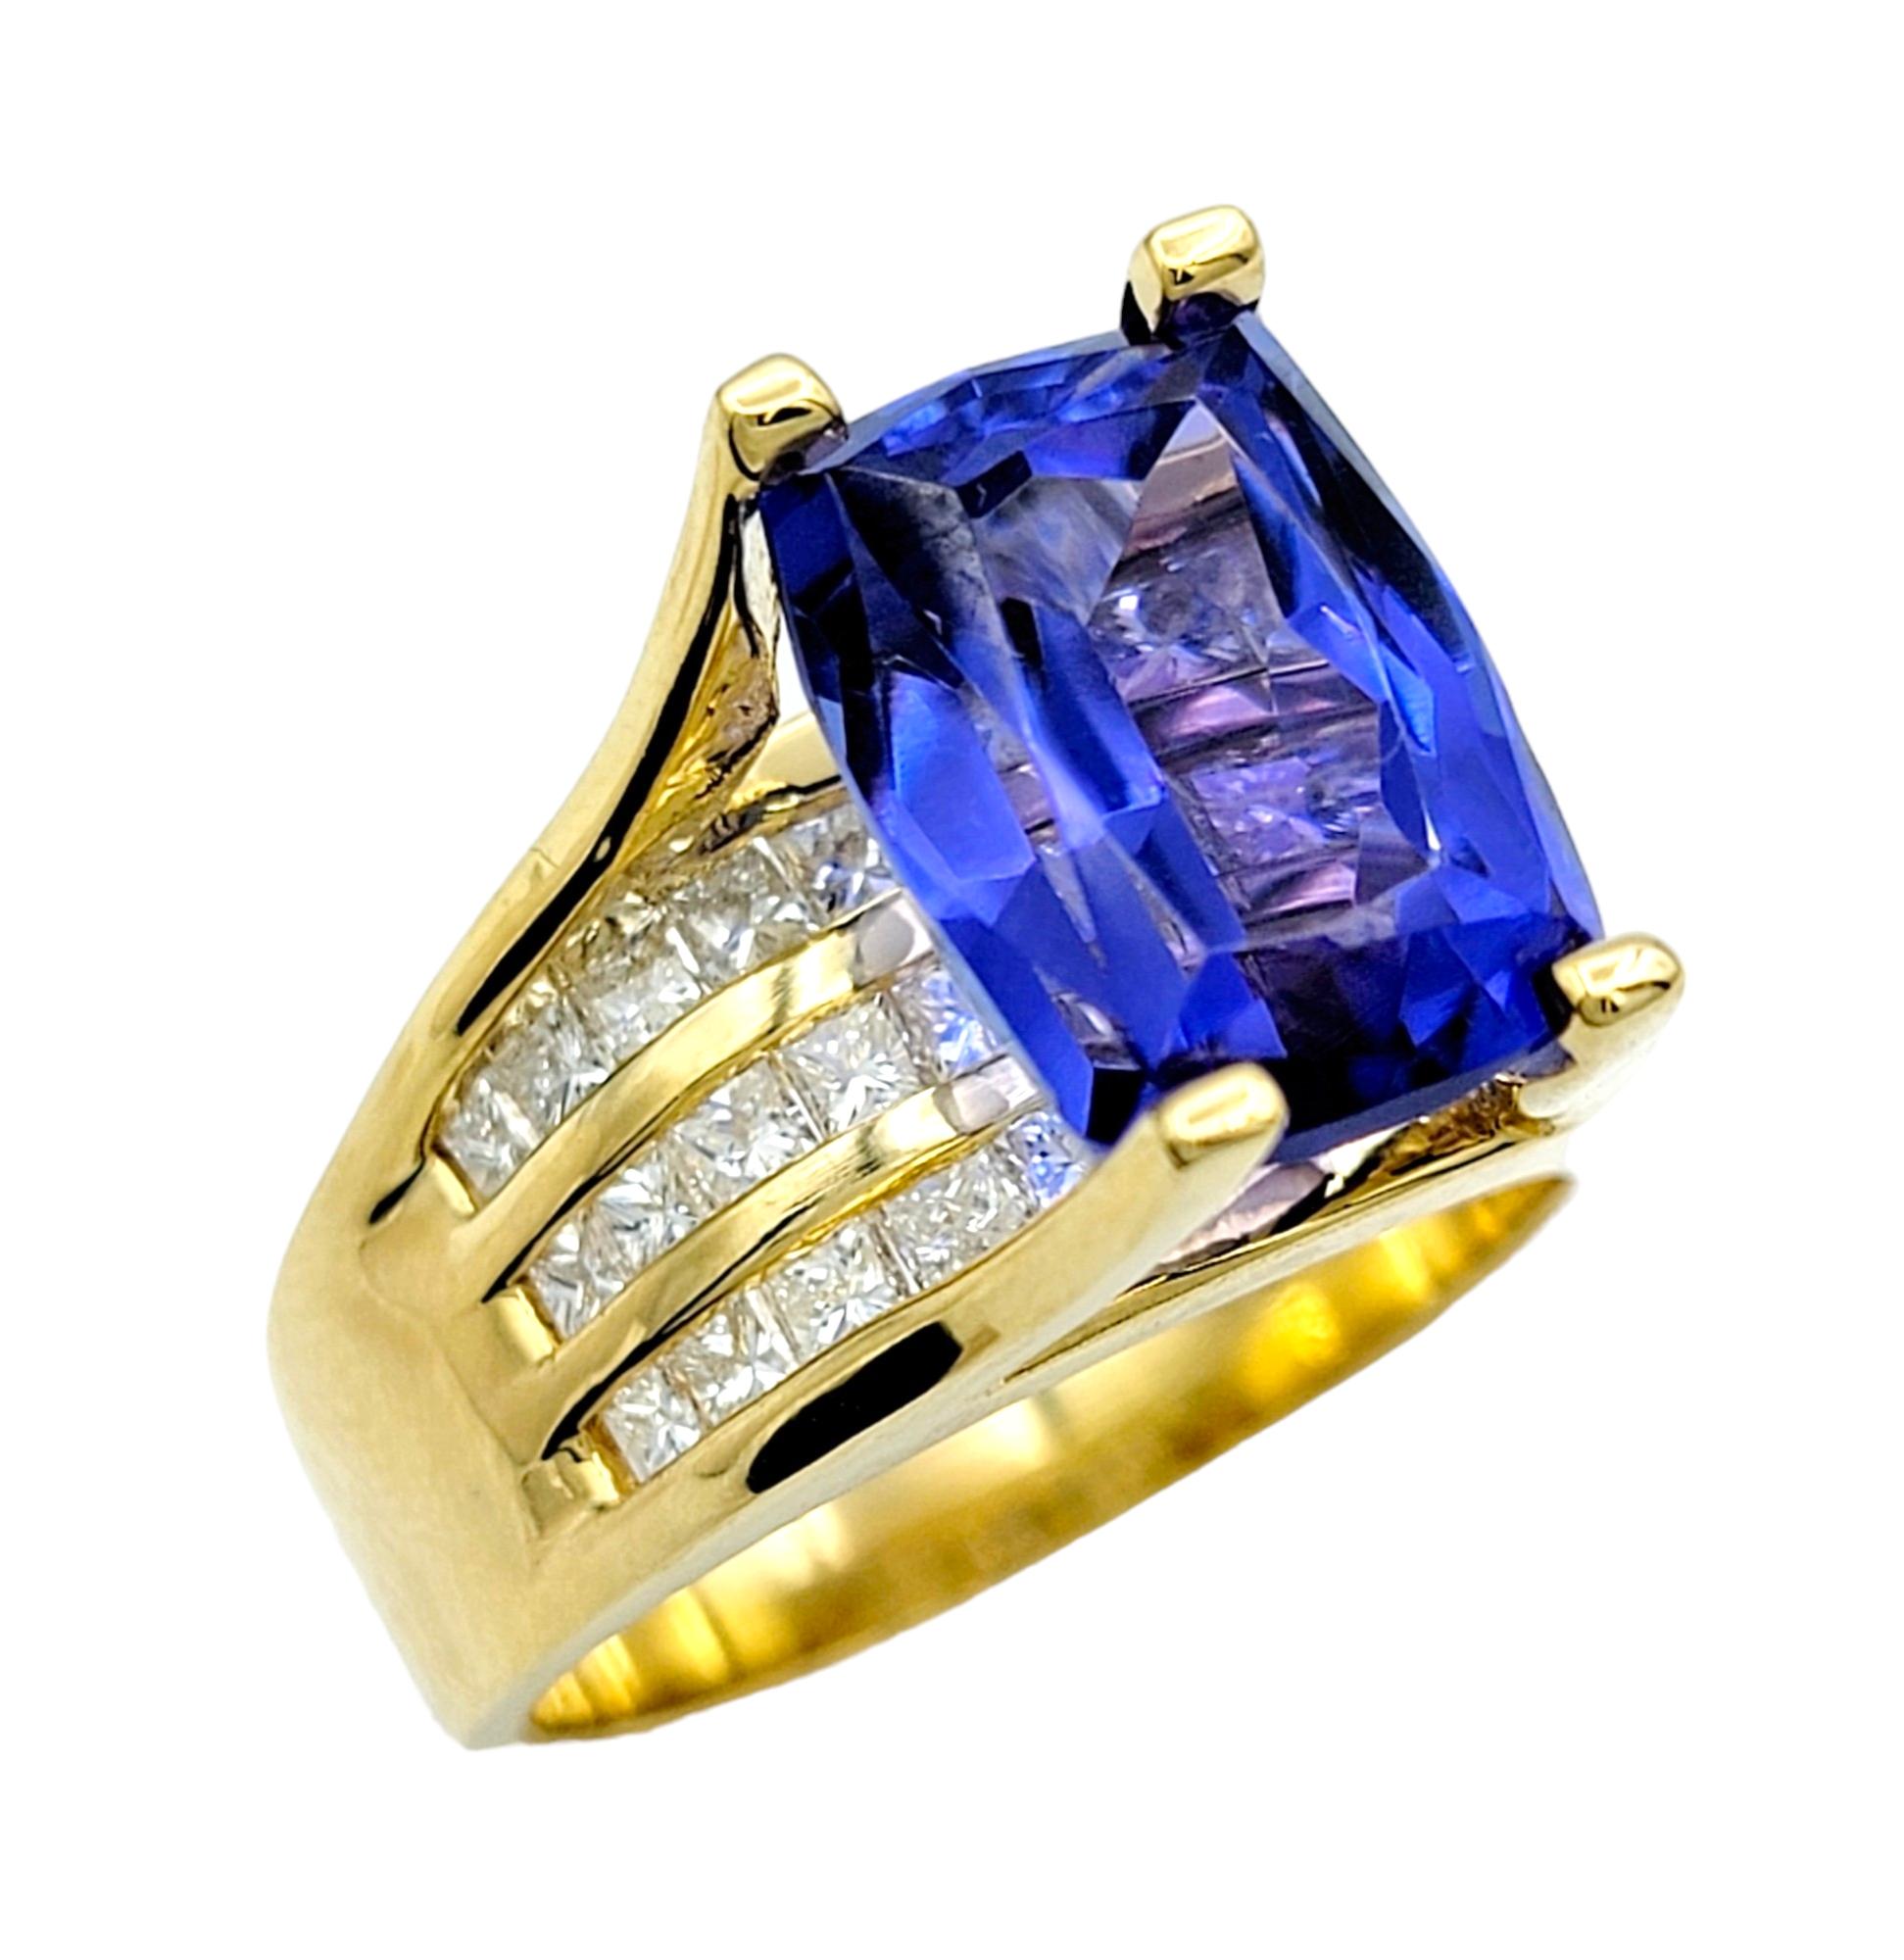 Ring Size: 9.5

Indulge in the mesmerizing allure of our cushion cut tanzanite ring, a breathtaking statement piece set in luxurious polished yellow gold. The cushion-cut tanzanite takes center stage, its deep blue-purple hue captivating the